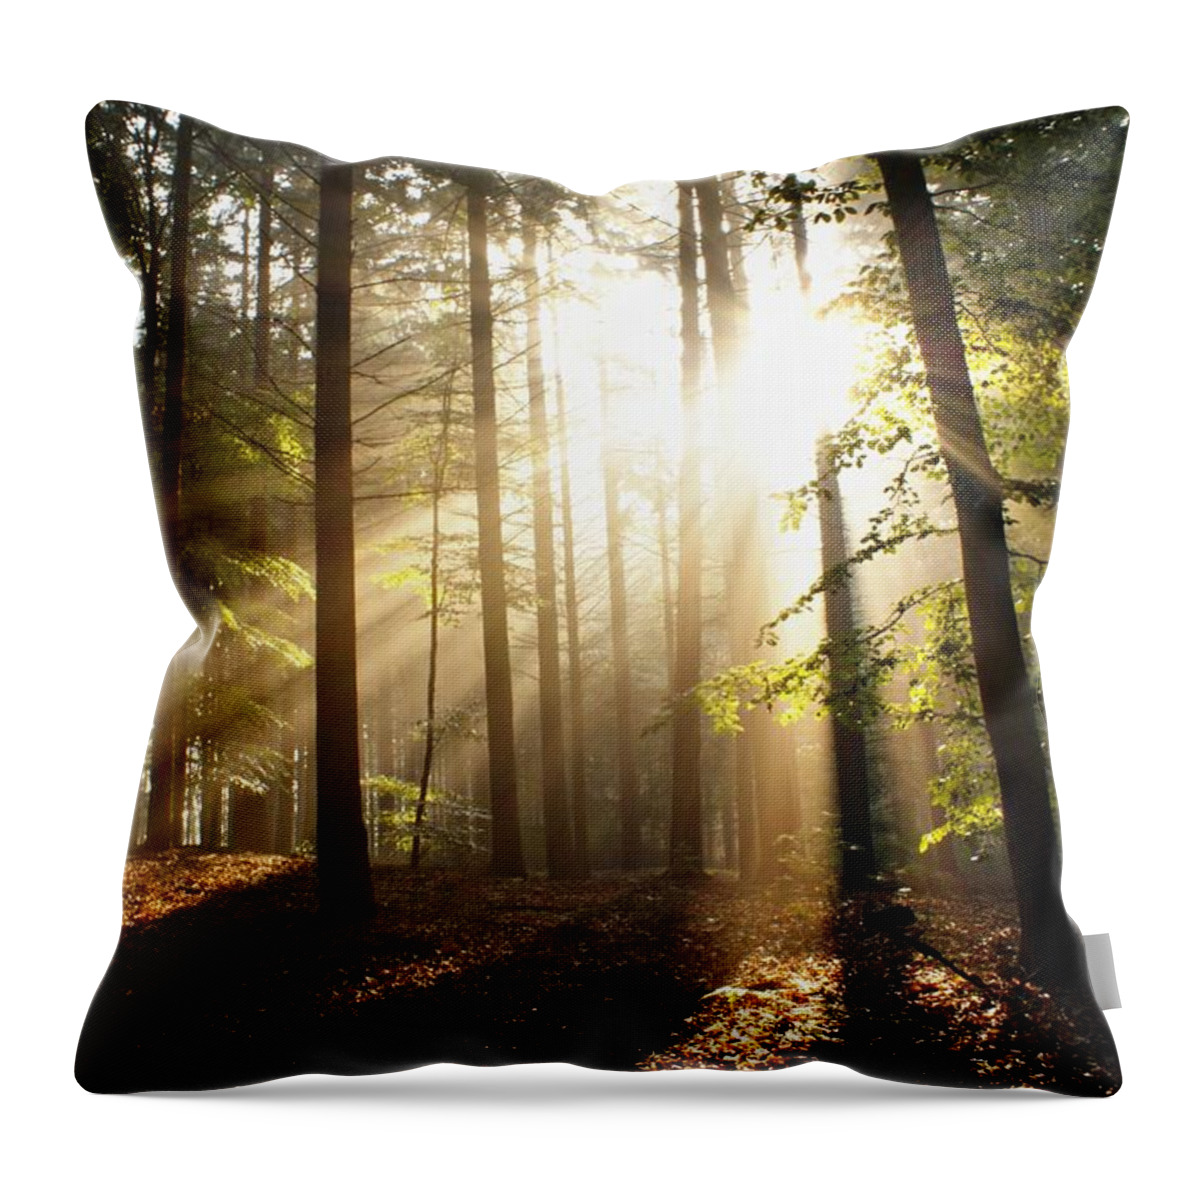 Tranquility Throw Pillow featuring the photograph Bright Light by Bob Van Den Berg Photography